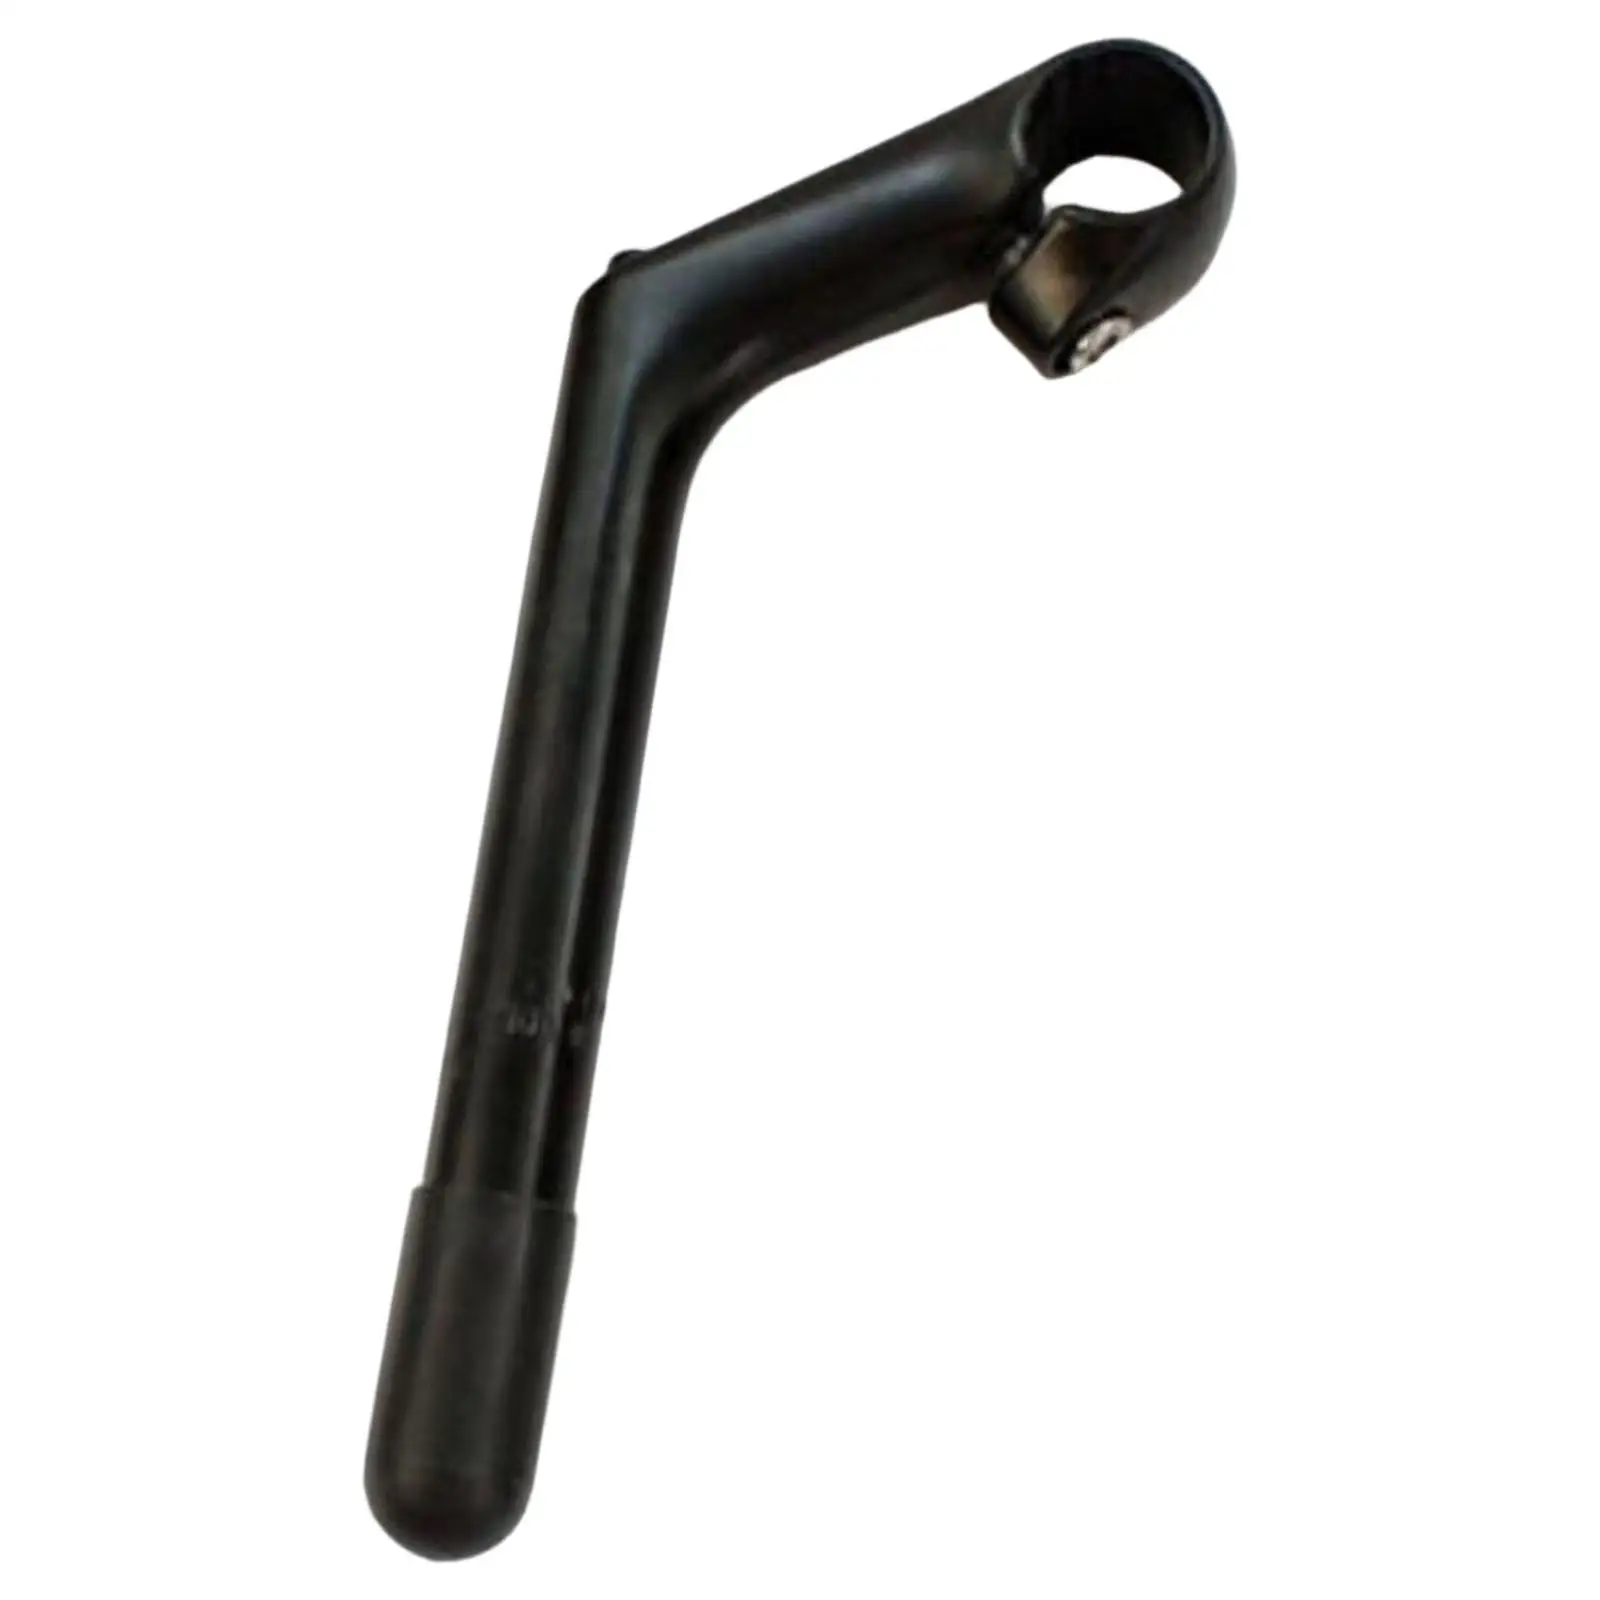 Clssic Hndle Br Stem with Threded Tube Gooseneck Shpe Sturdy luminum lloy Bicycle Quill Stem for Bech Cruiser Bikes